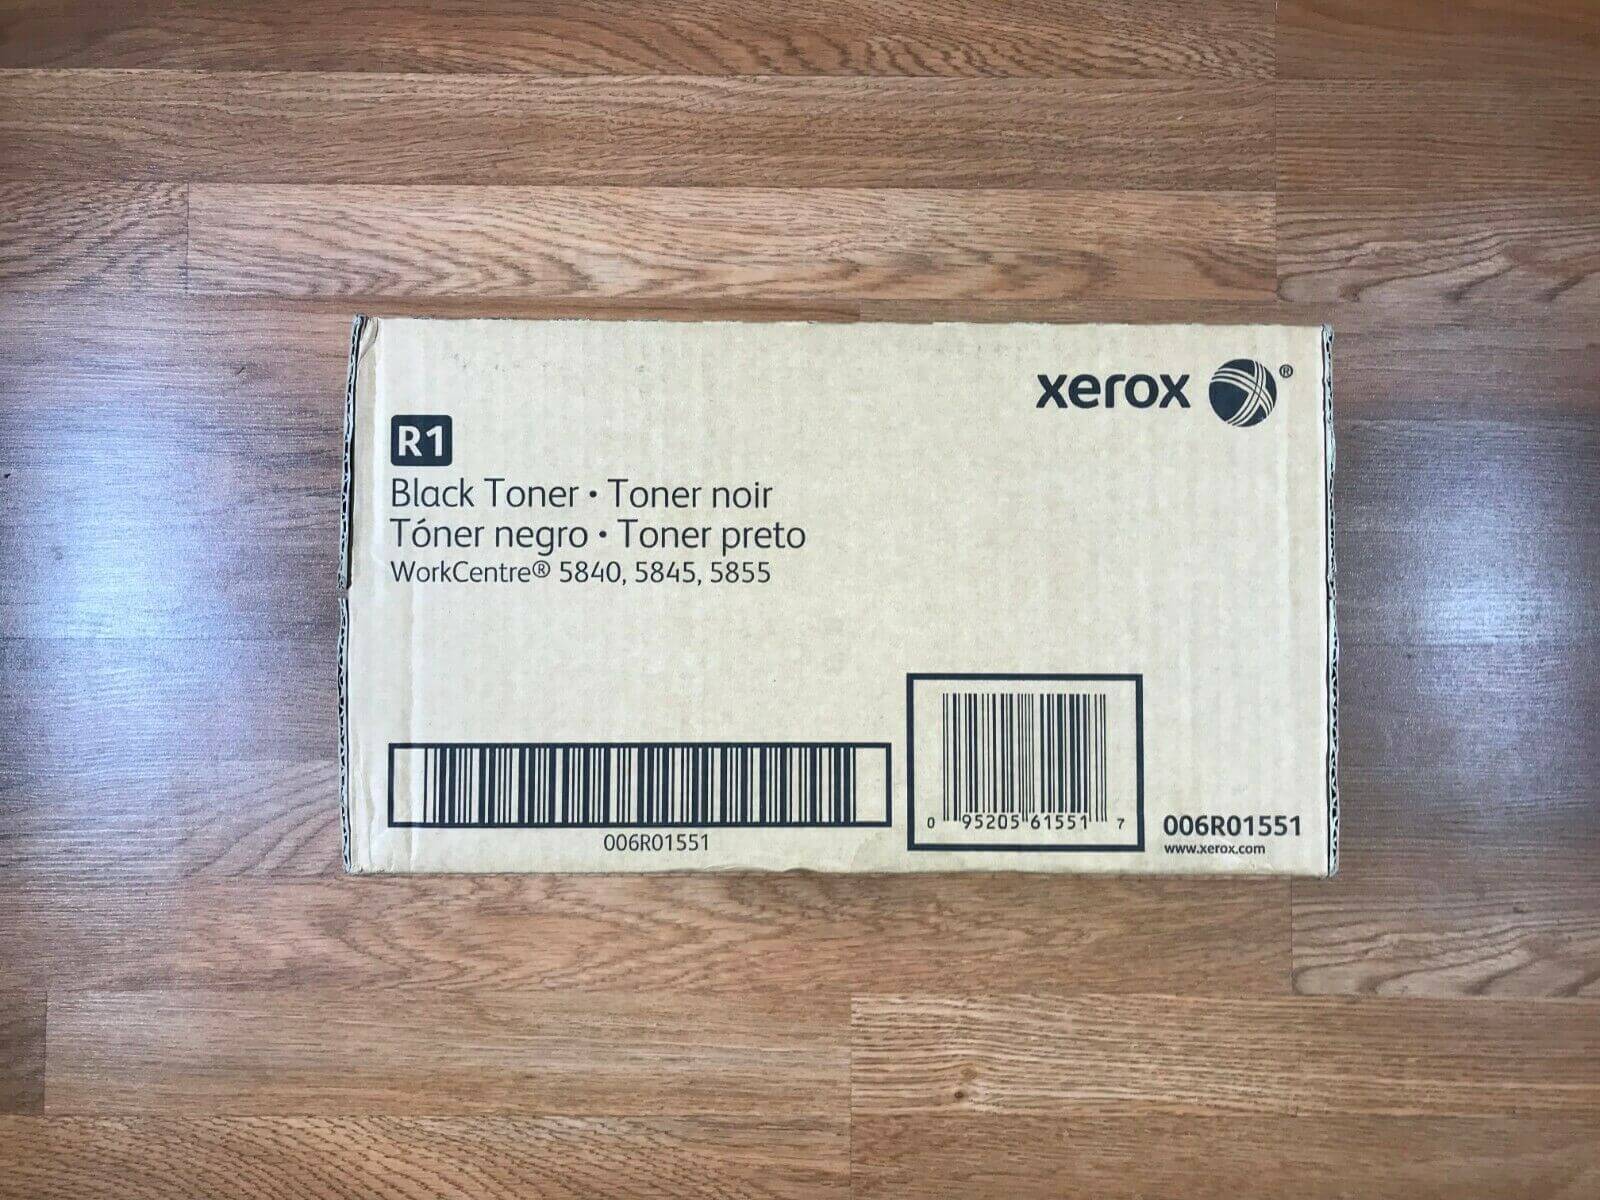 XEROX 006R01551 Black Toner Cartridge For WorkCentre 5845-5855 - Same Day Ship!! - copier-clearance-center